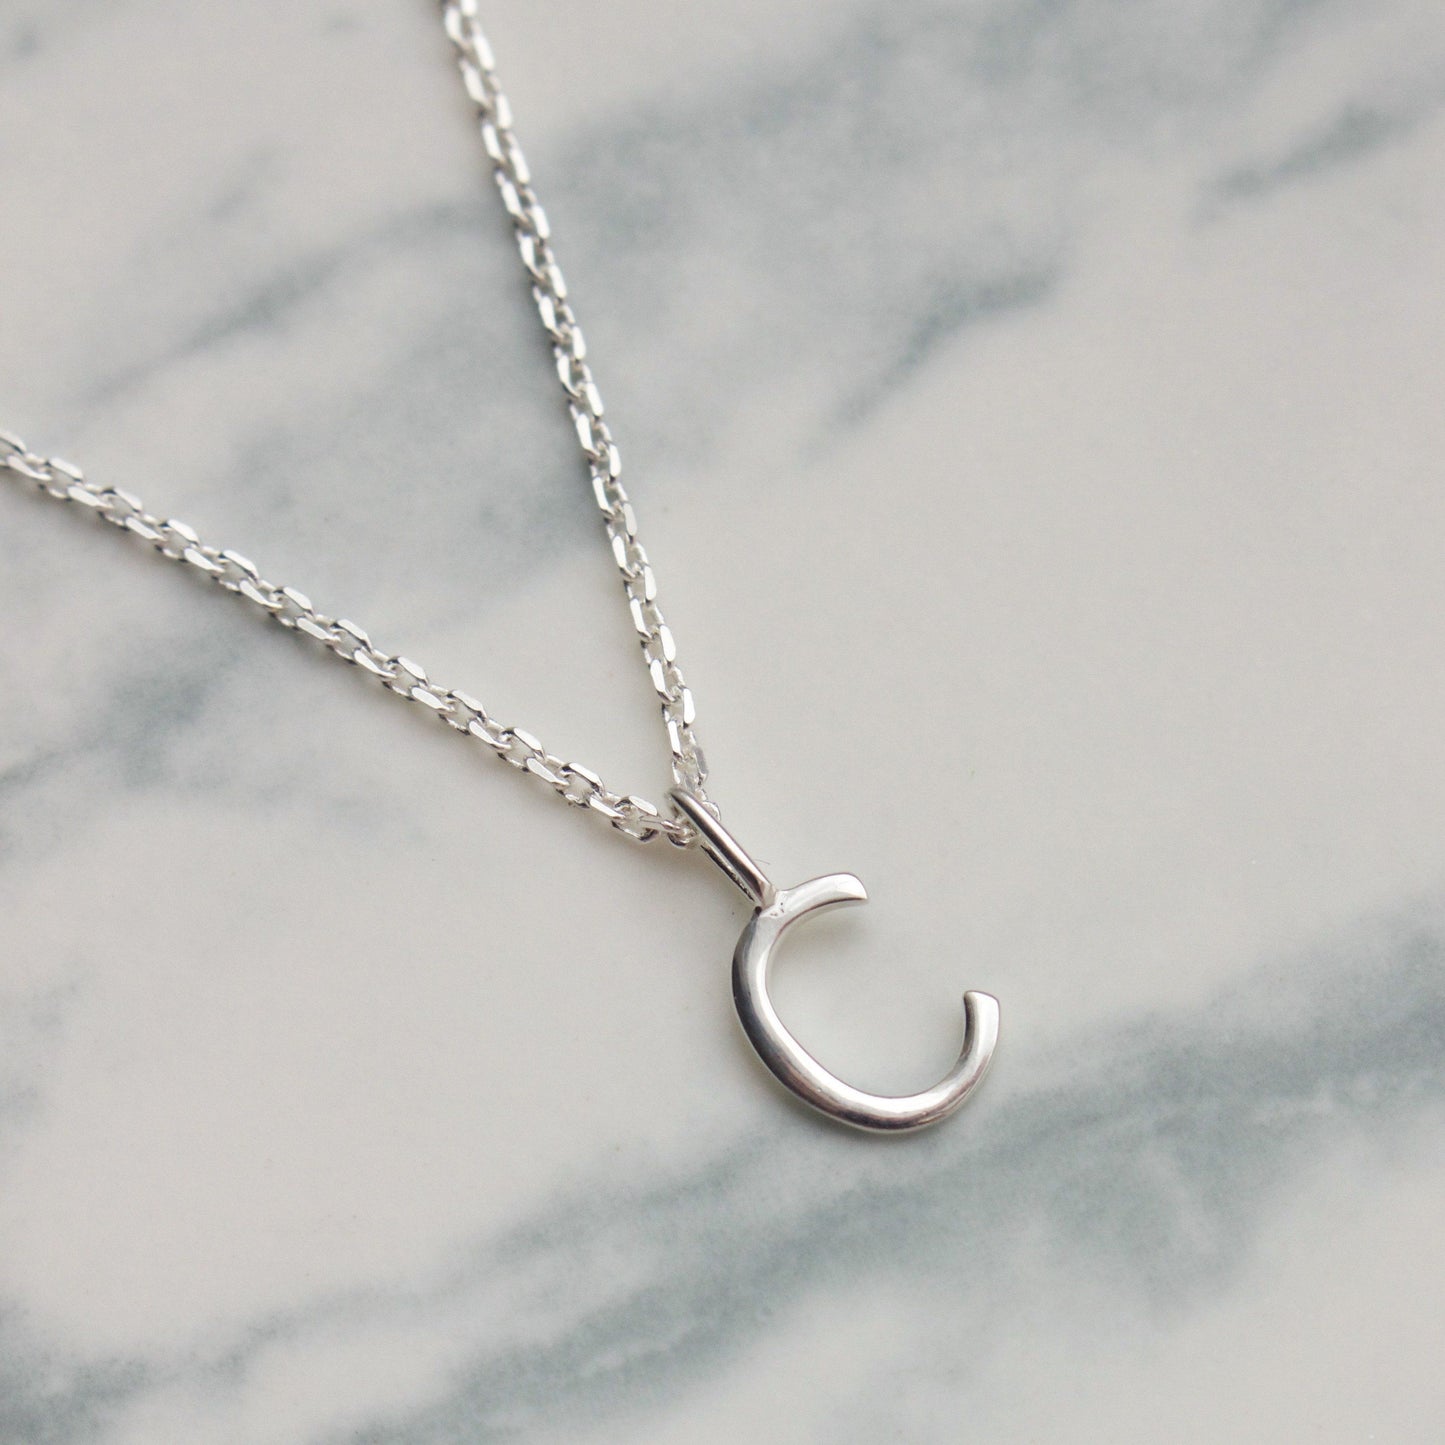 Delicate Initial Pendant in Sterling Silver necklace Malya 